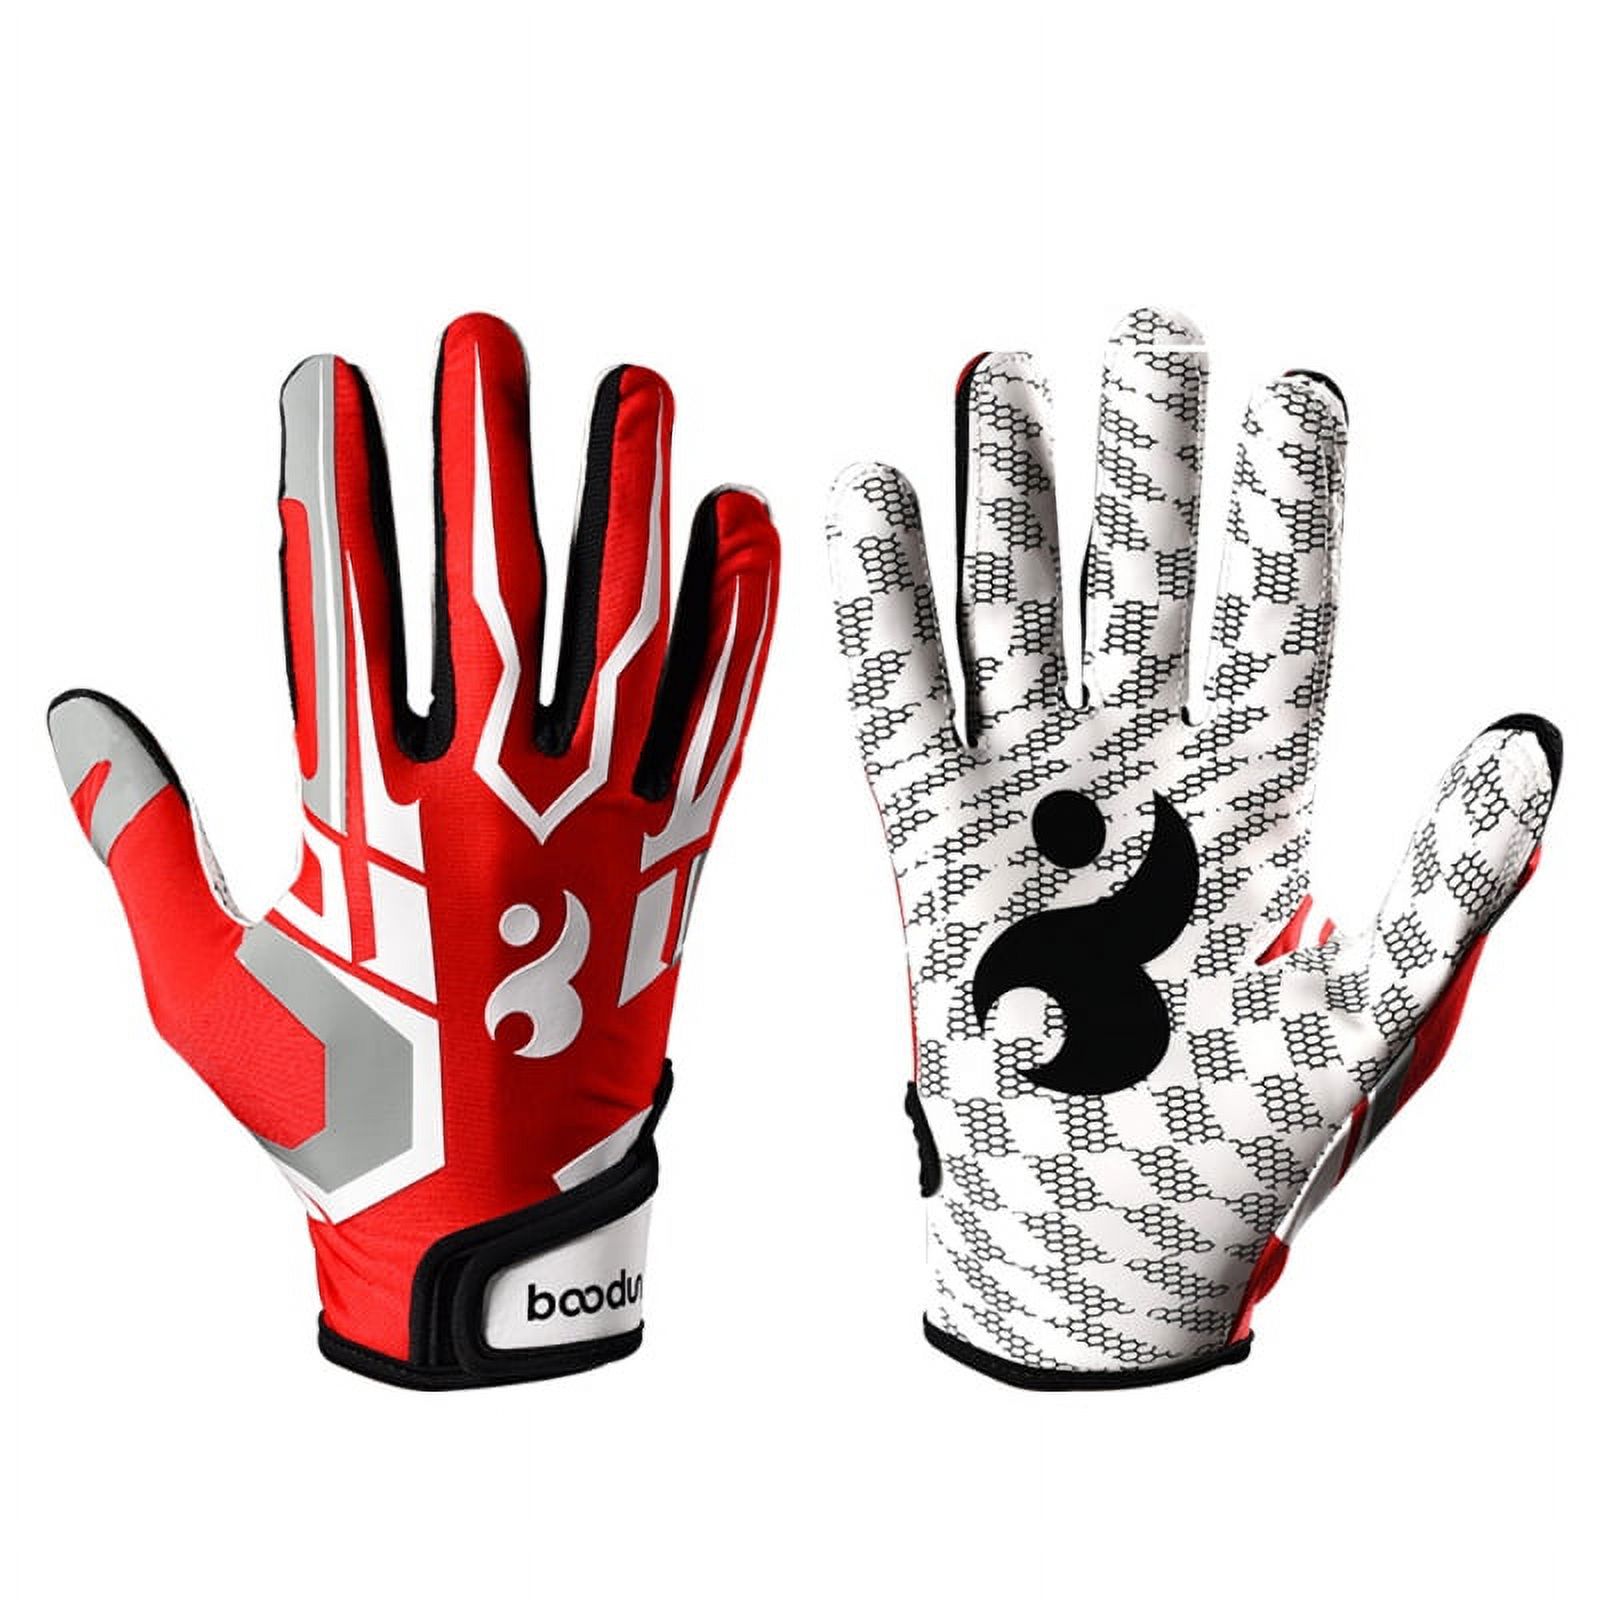 LIANXUE Silicone Grip Football Gloves Breathable Baseball Gloves for ...